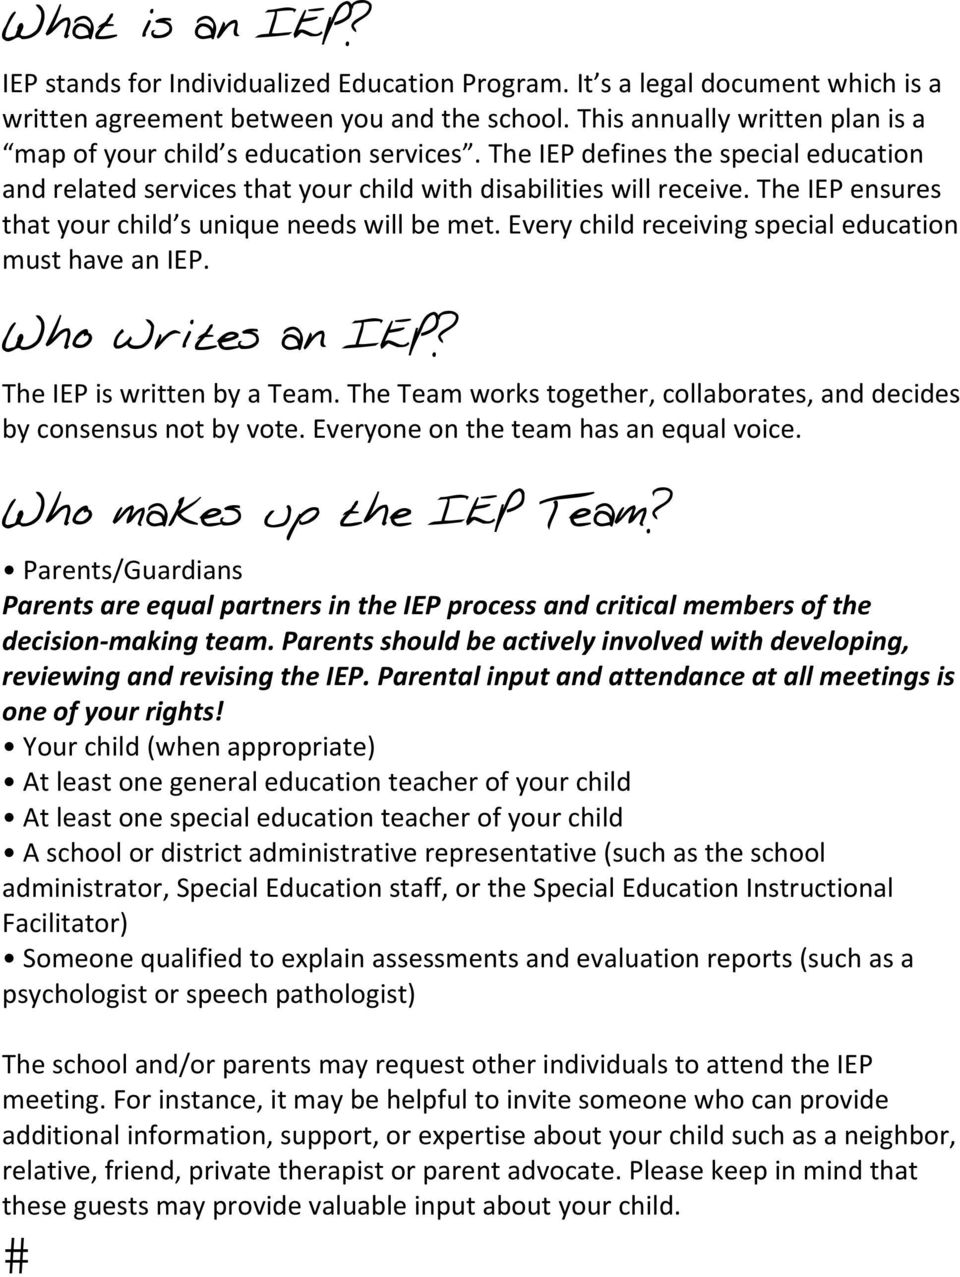 The IEP ensures that your child s unique needs will be met. Every child receiving special education must have an IEP. Who writes an IEP? The IEP is written by a Team.